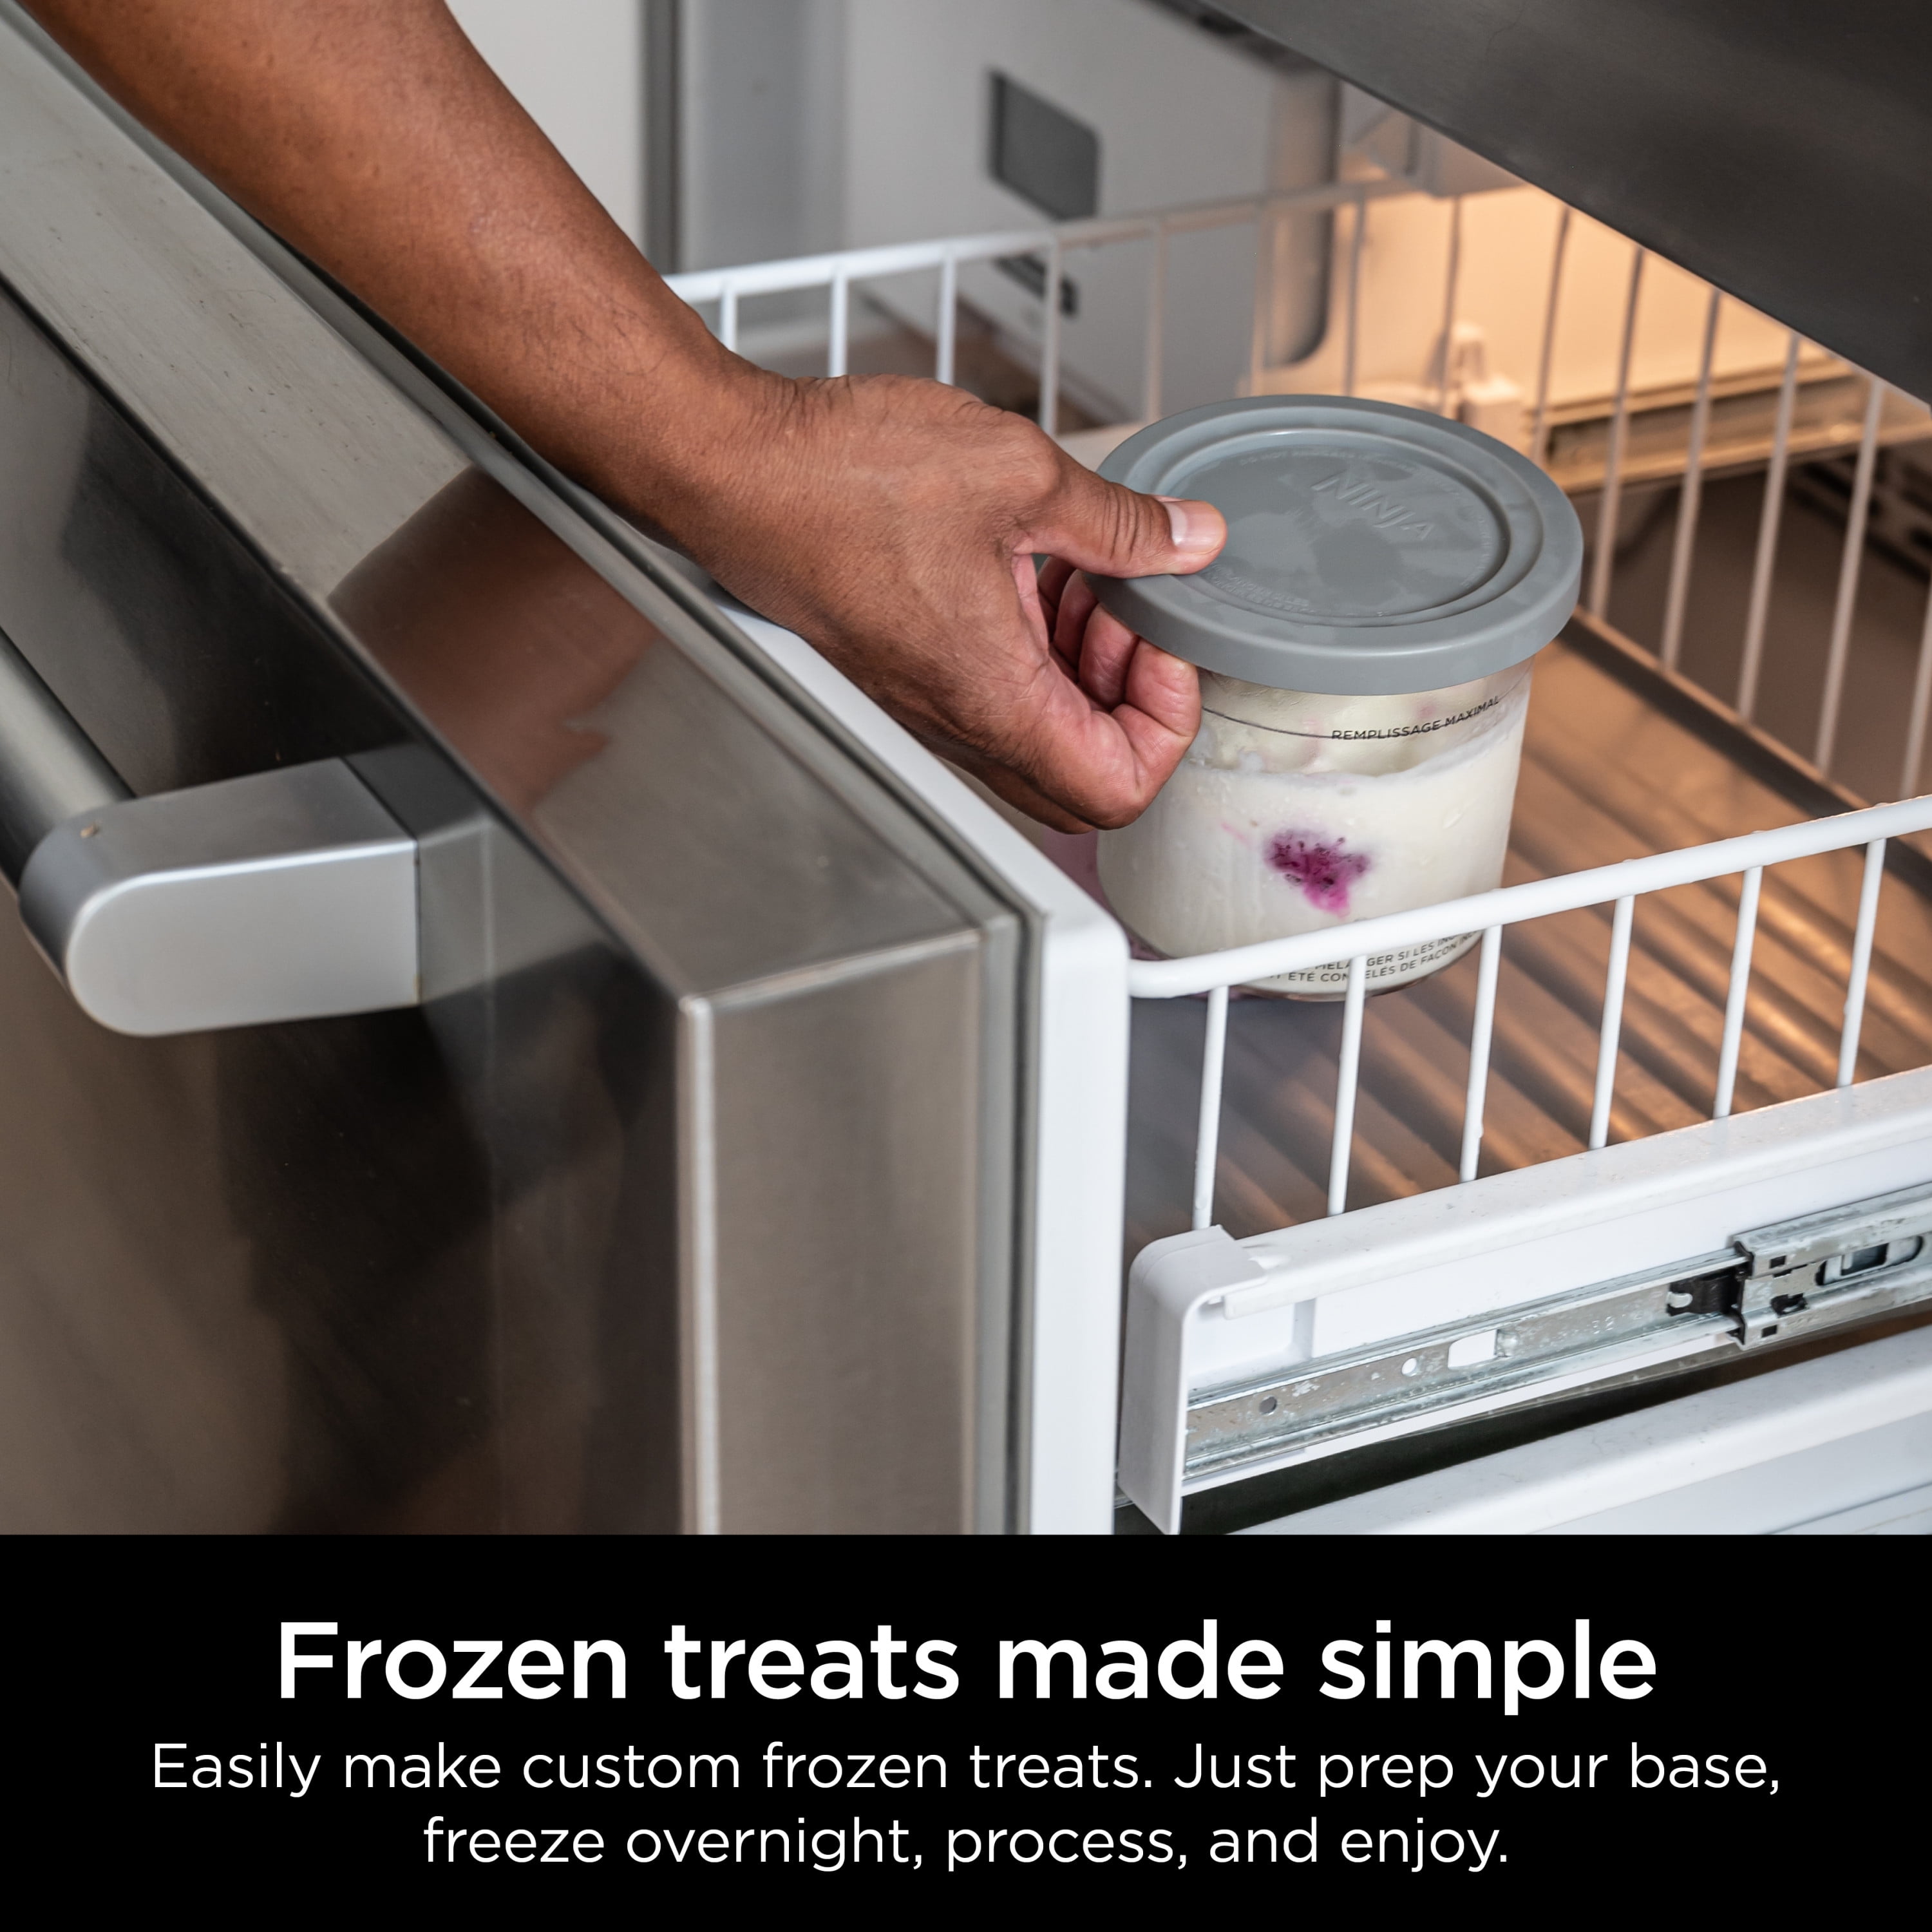 Ninja™ CREAMi™ Ice Cream Maker, 5 One-Touch Programs, with 4 Pints Included